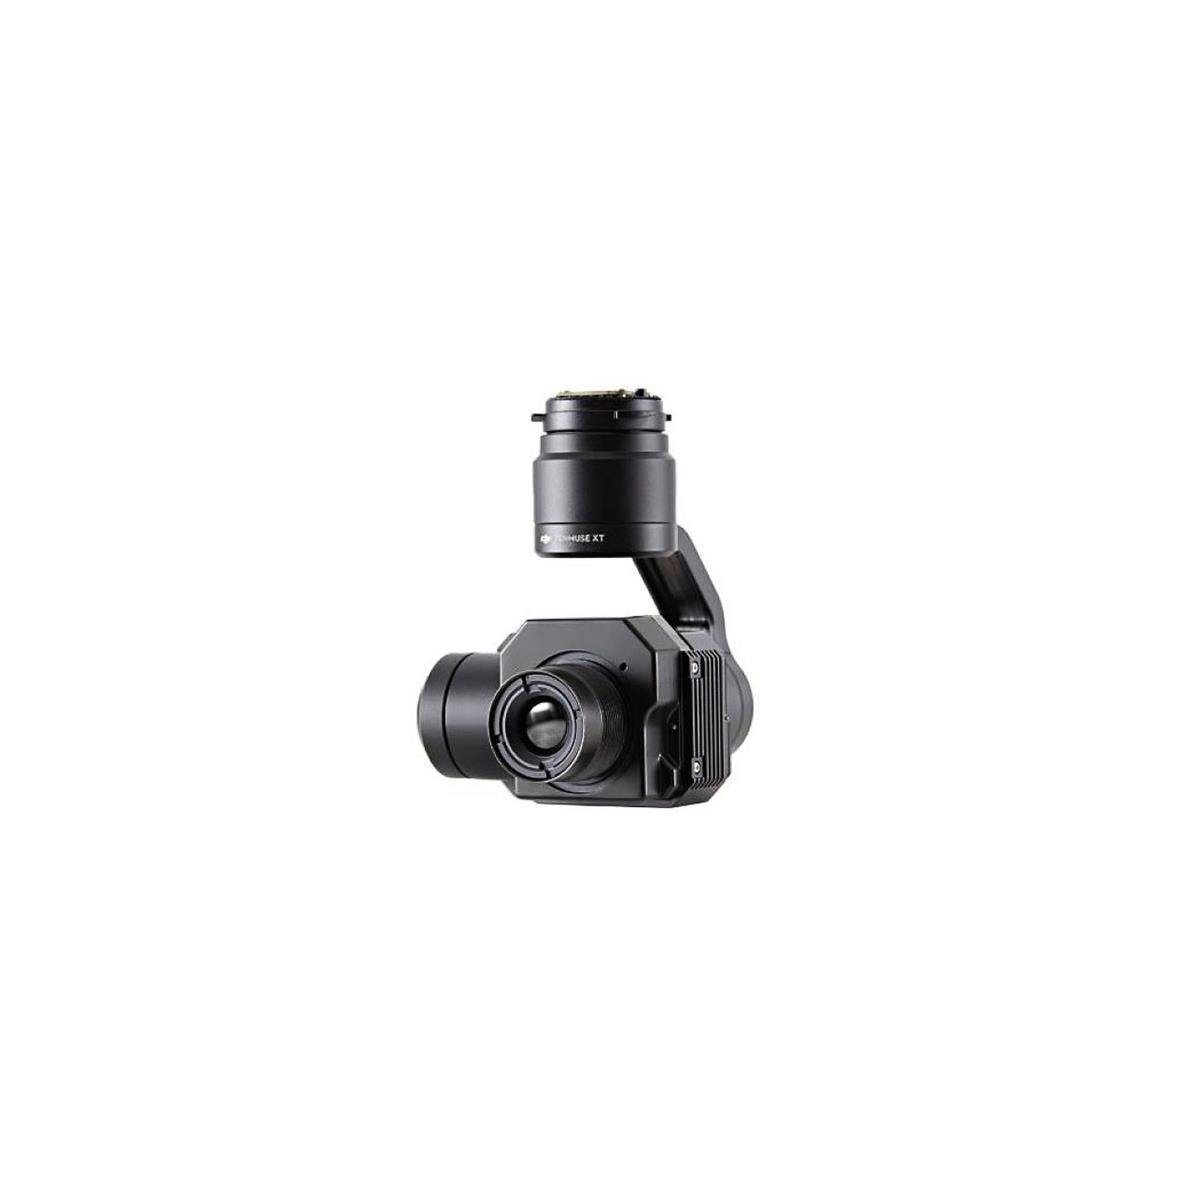 Image of DJI Zenmuse XT Thermal Radiometric Camera with 19mm Lens